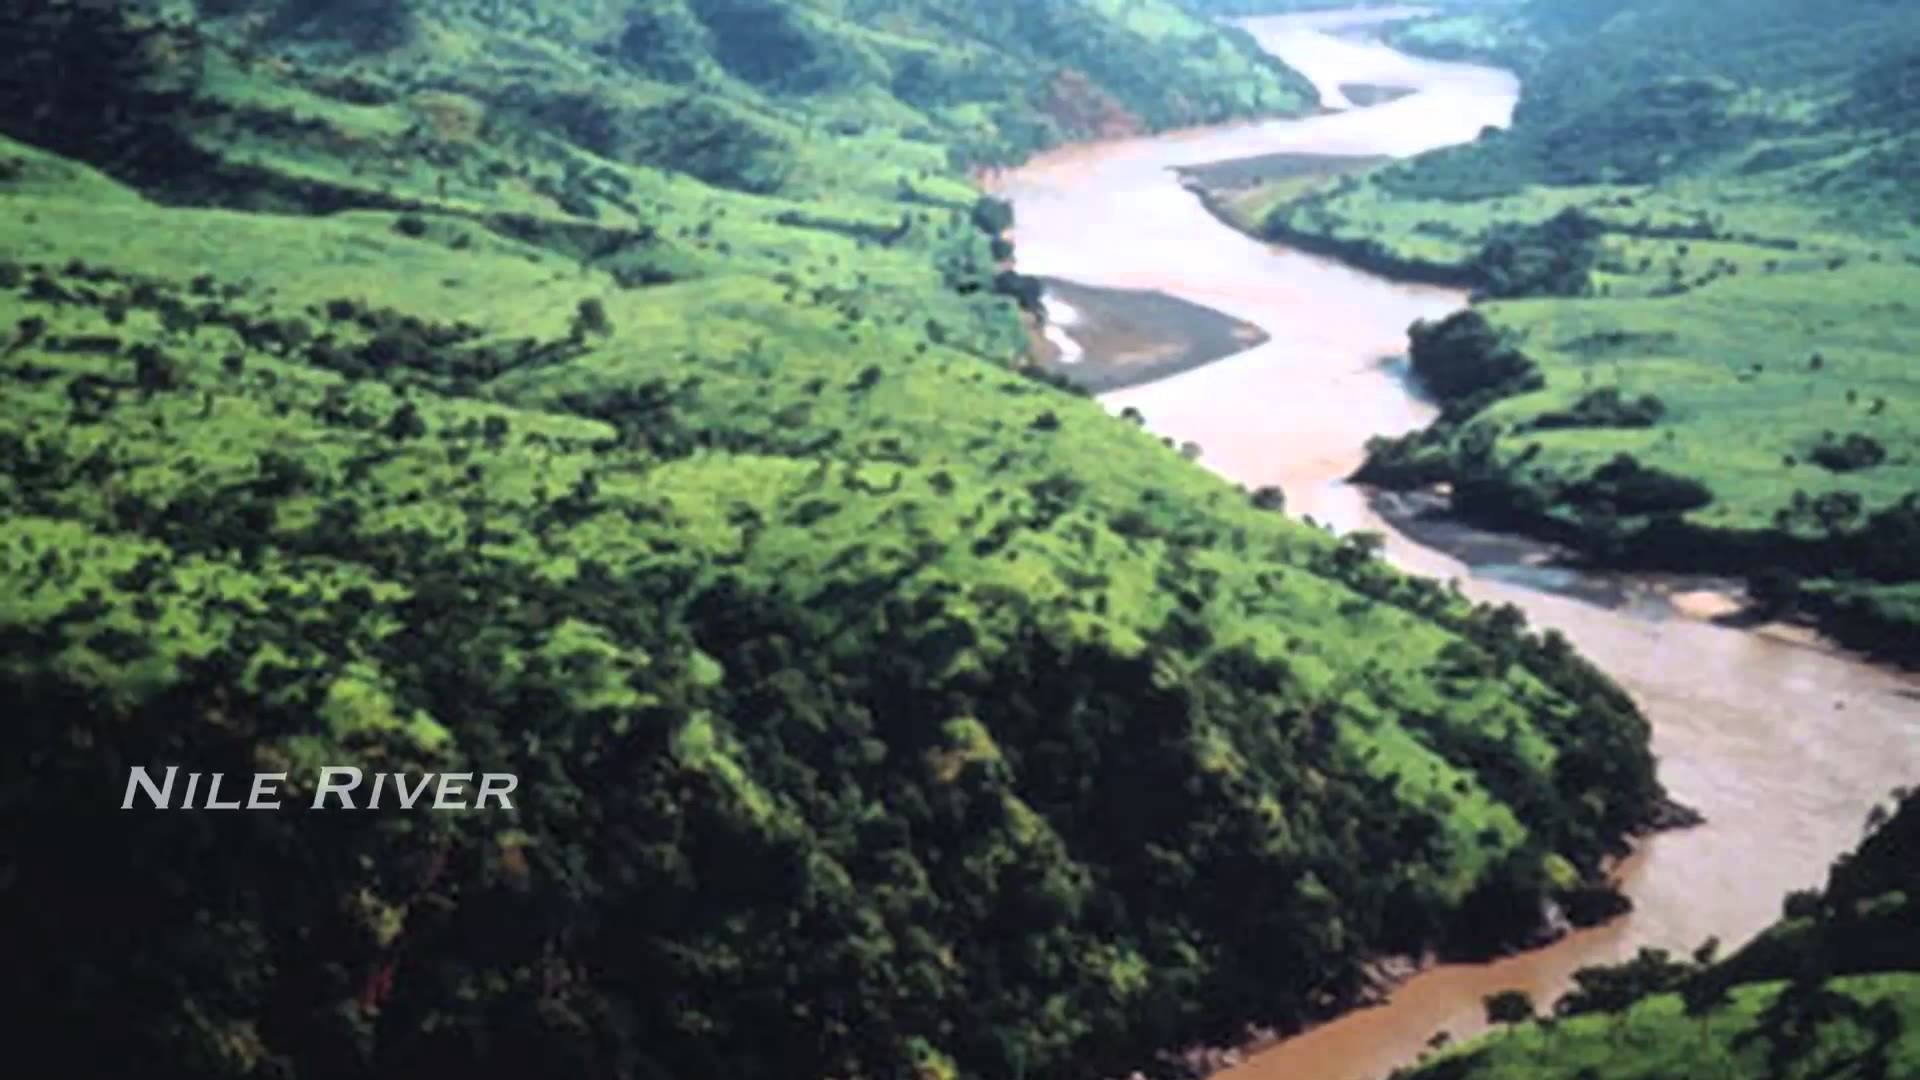 Nile River - World Largest River - River - YouTube